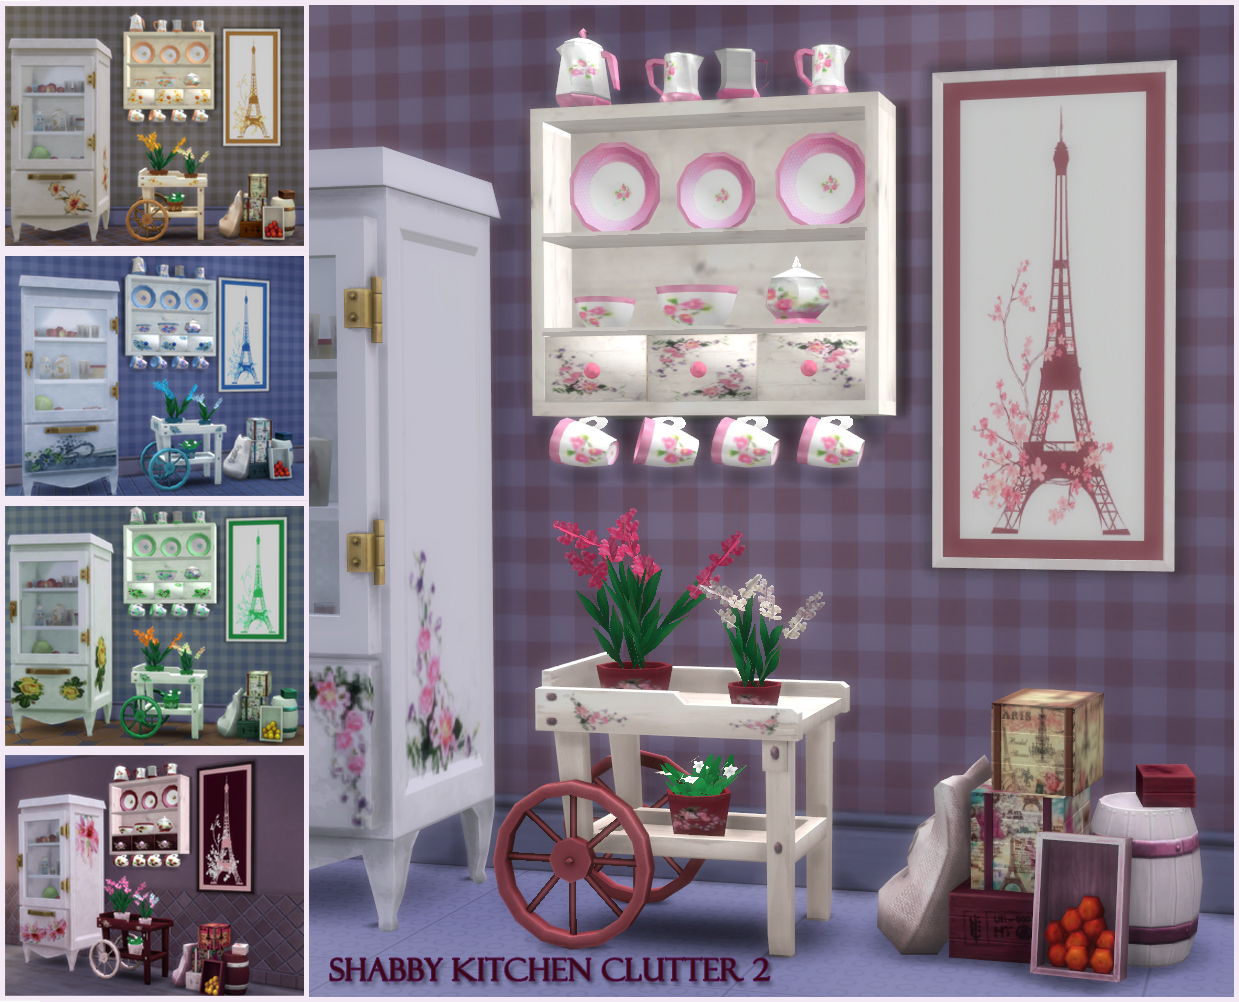 Sims 4 Ccs The Best Shabby Kitchen Clutter Part 2 By Pqsim4 All In